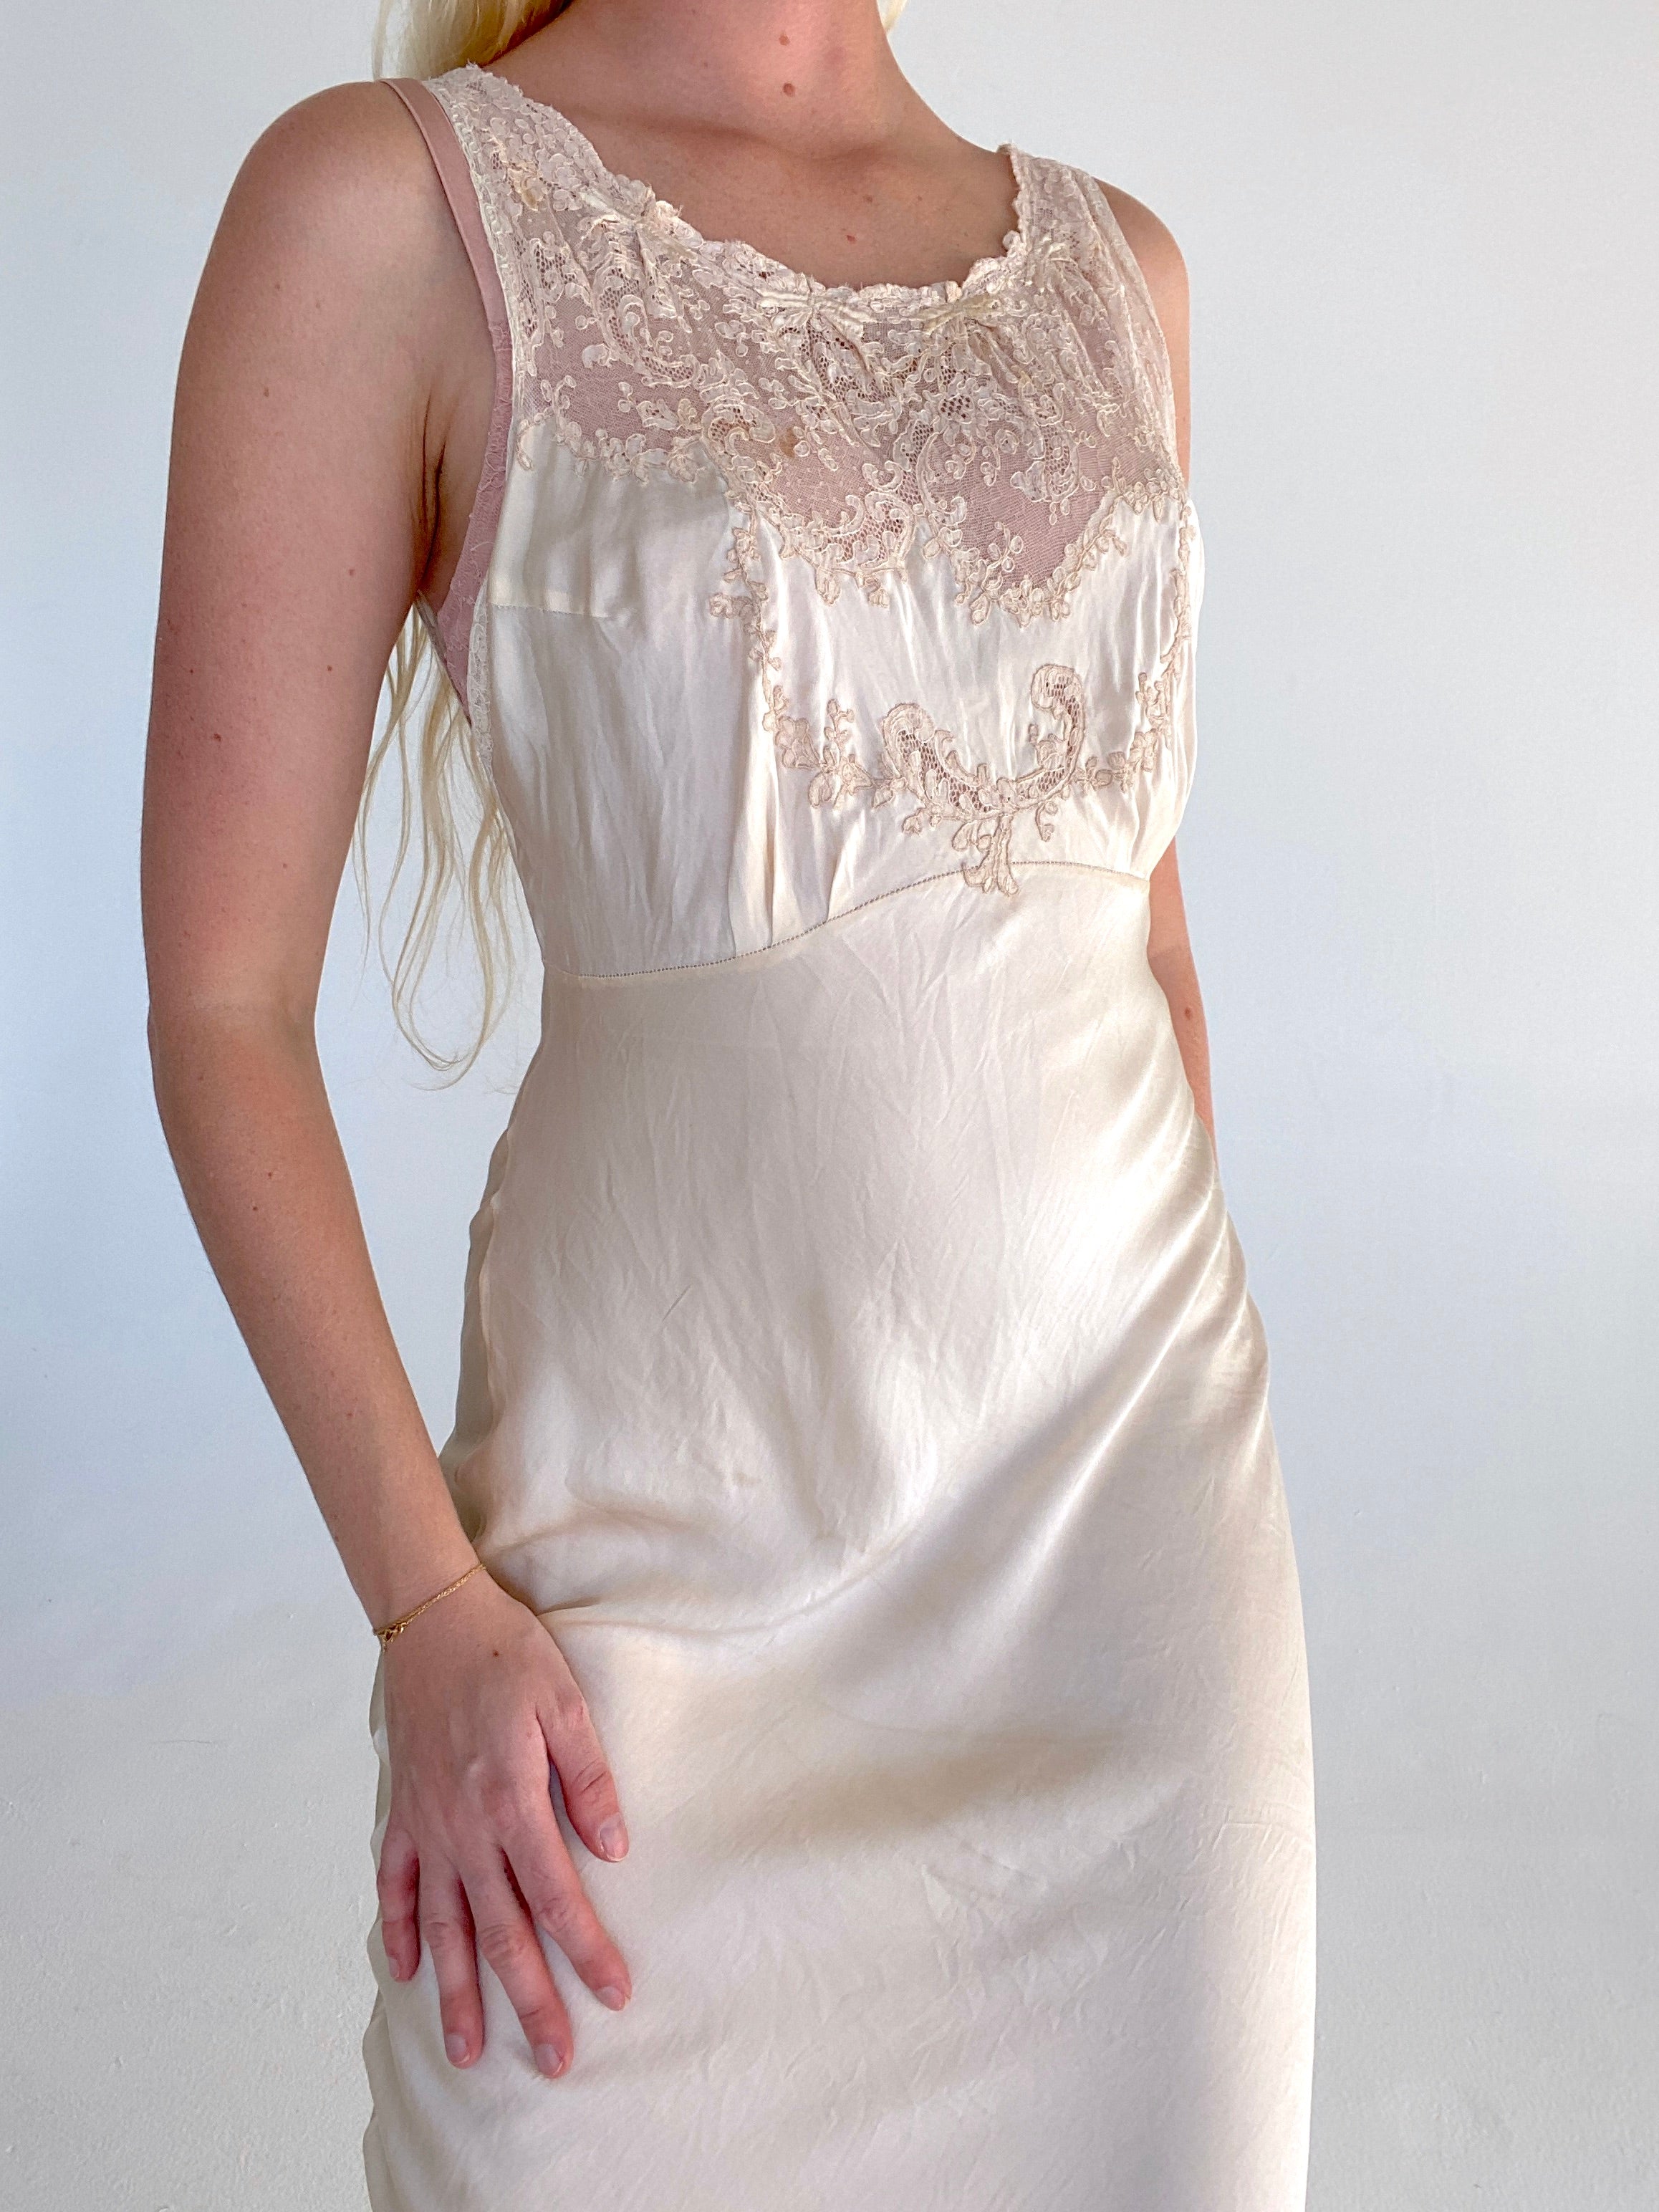 1930's White Silk Slip with Bow Embroidery and Lace Inserts